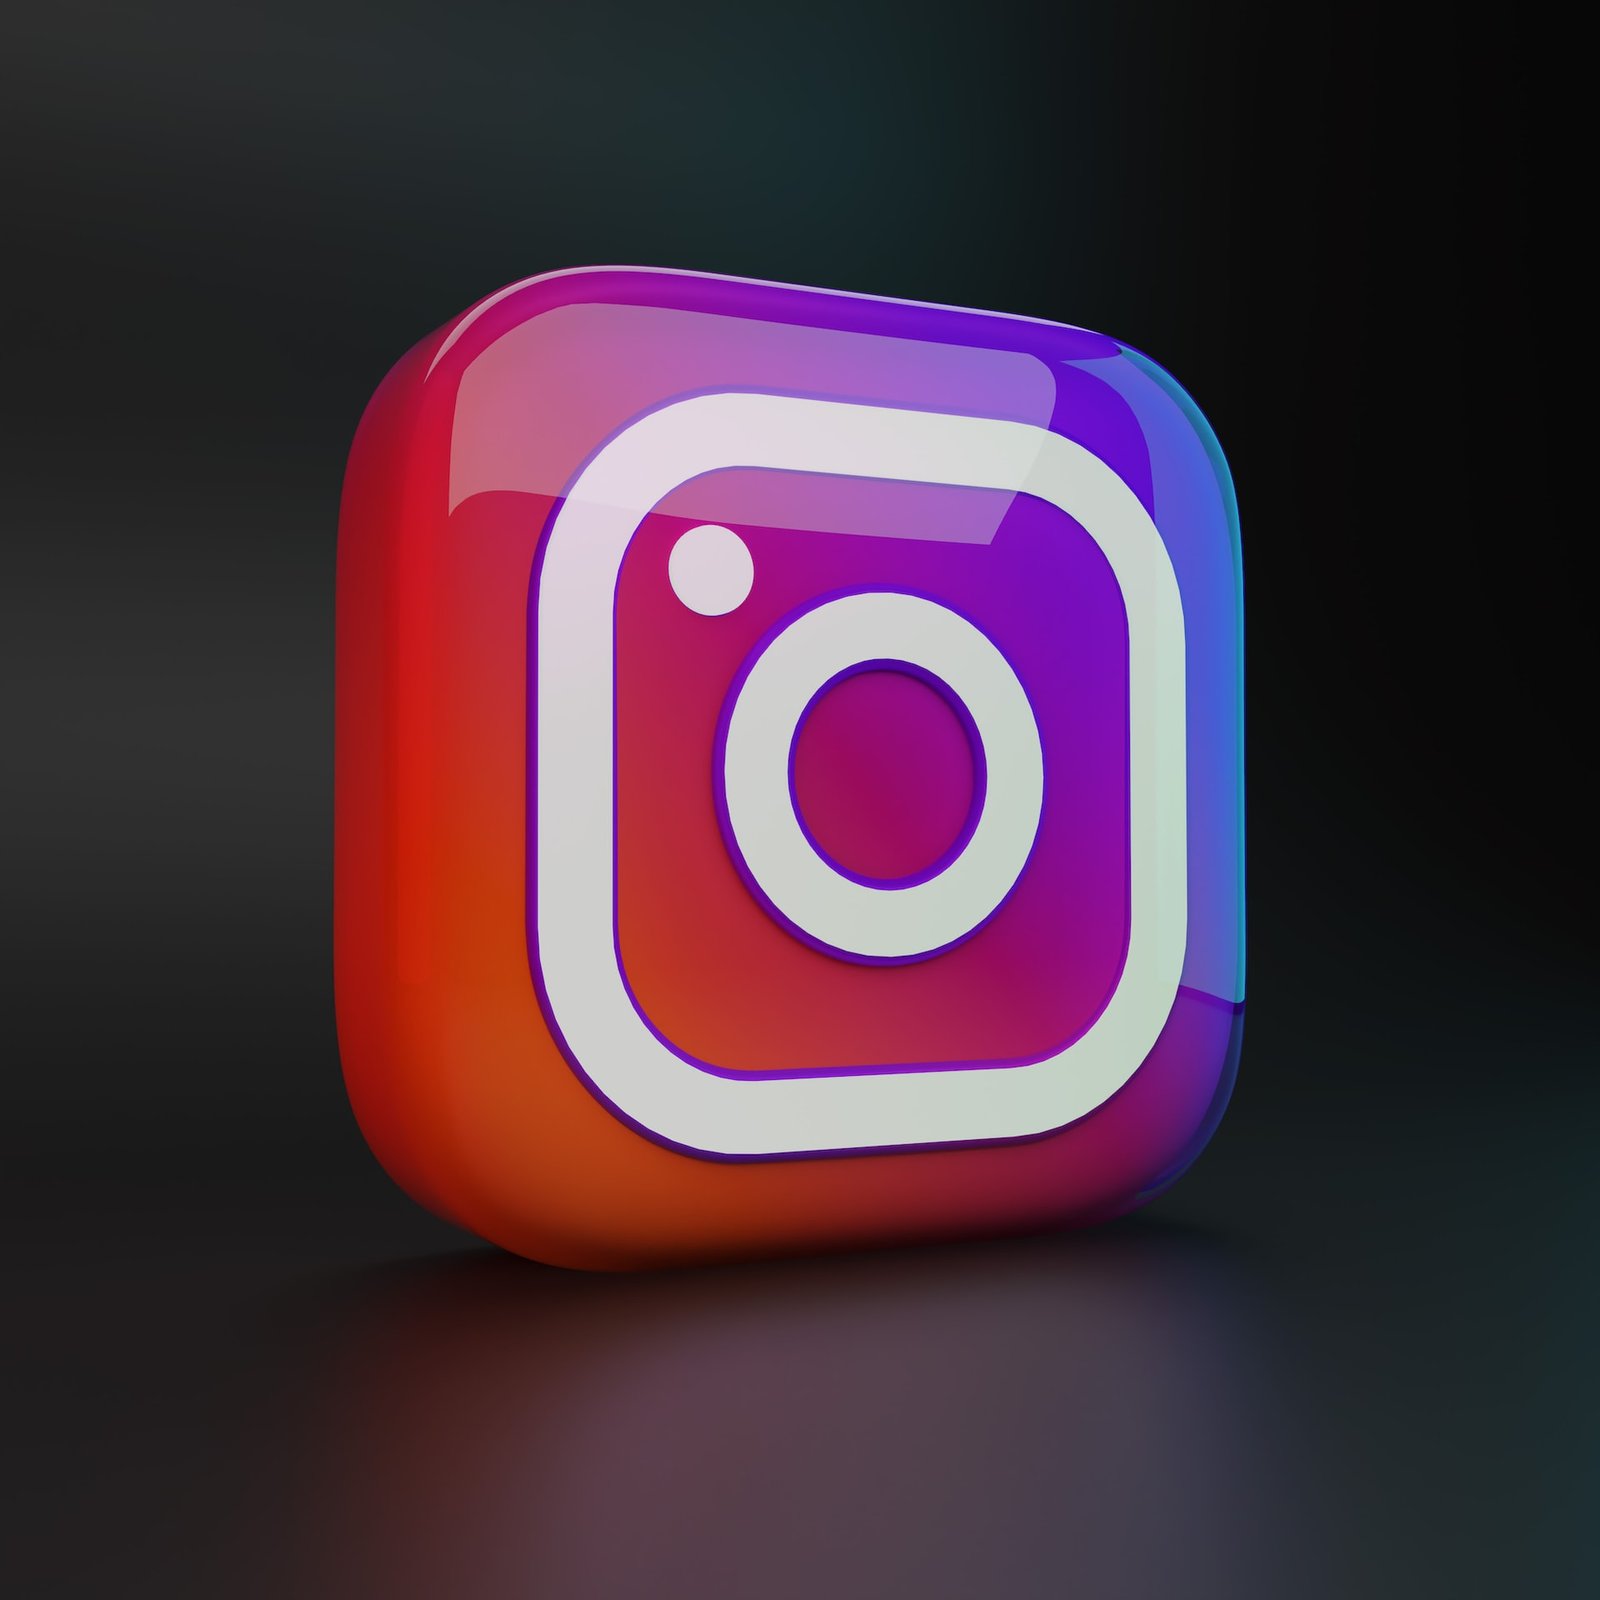 Instagram Rolling Out Reminder Ads, Testing Ads in Search Results